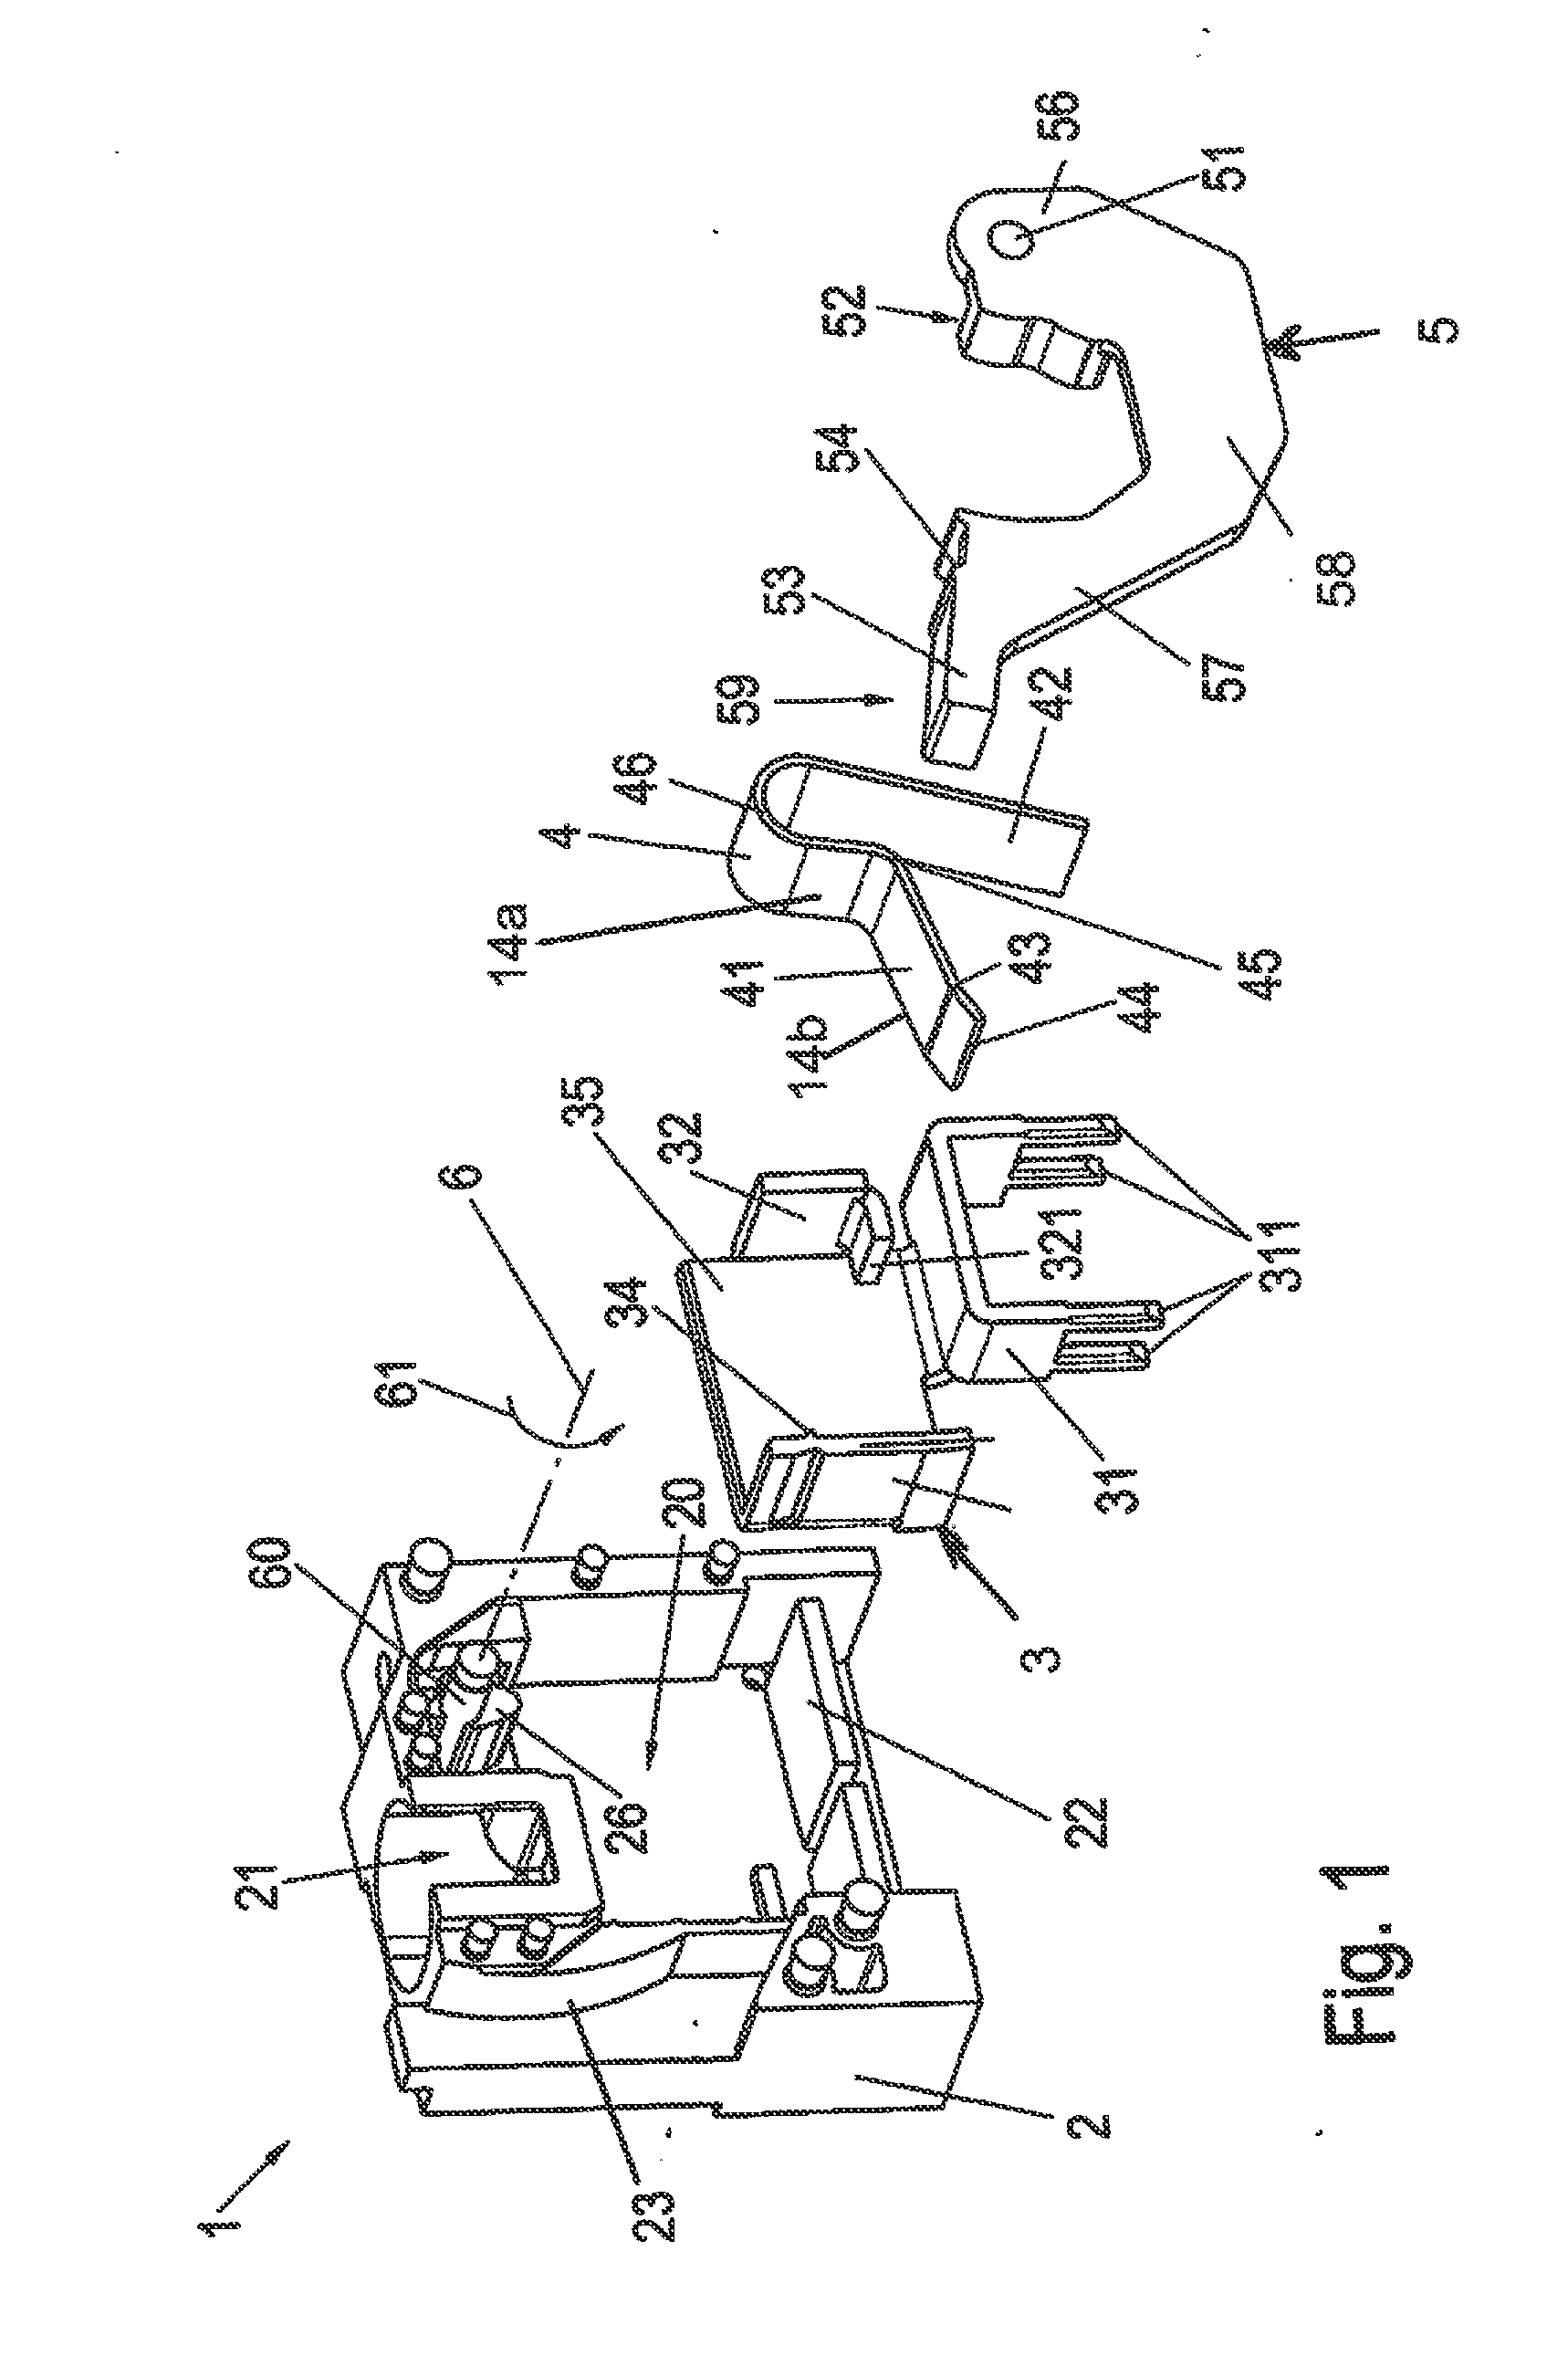 Spring-force clamping element with pivoting lever